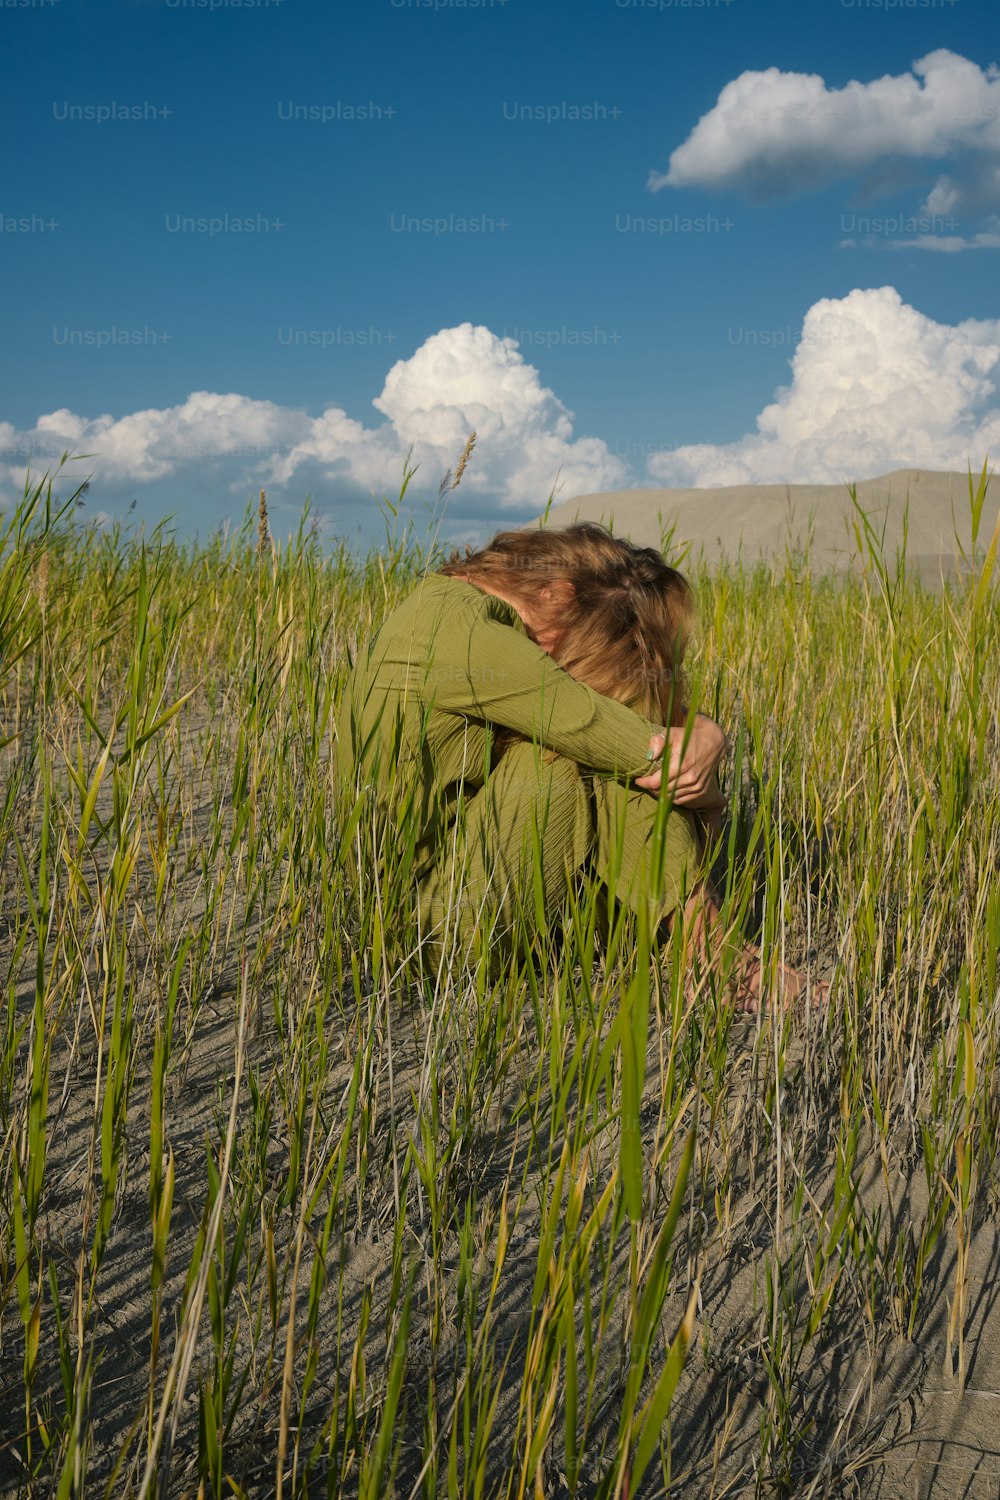 a woman kneeling down in a field of tall grass